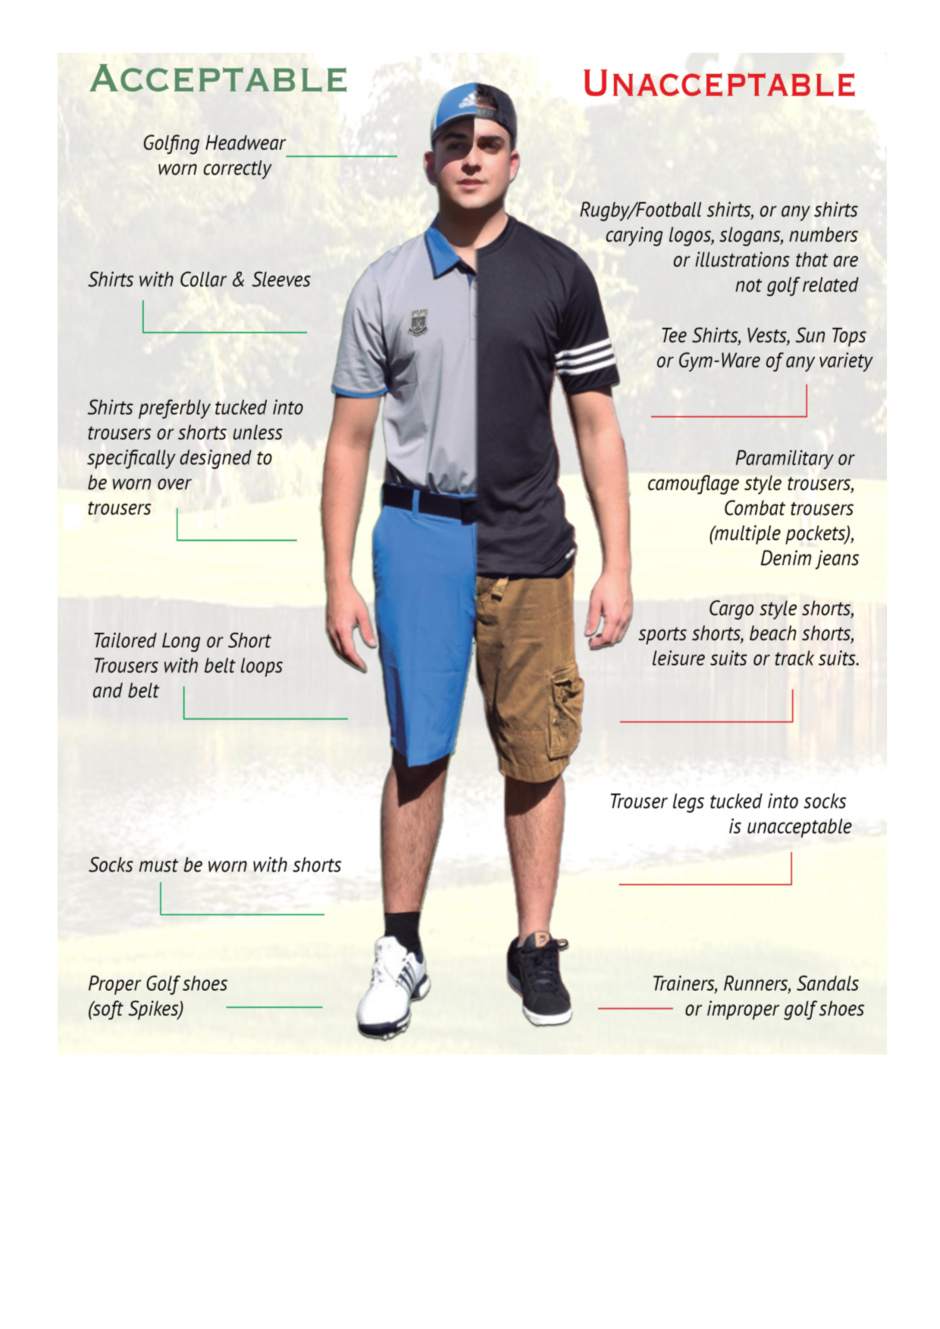 Dress Code Infographic :: Ross on Wye